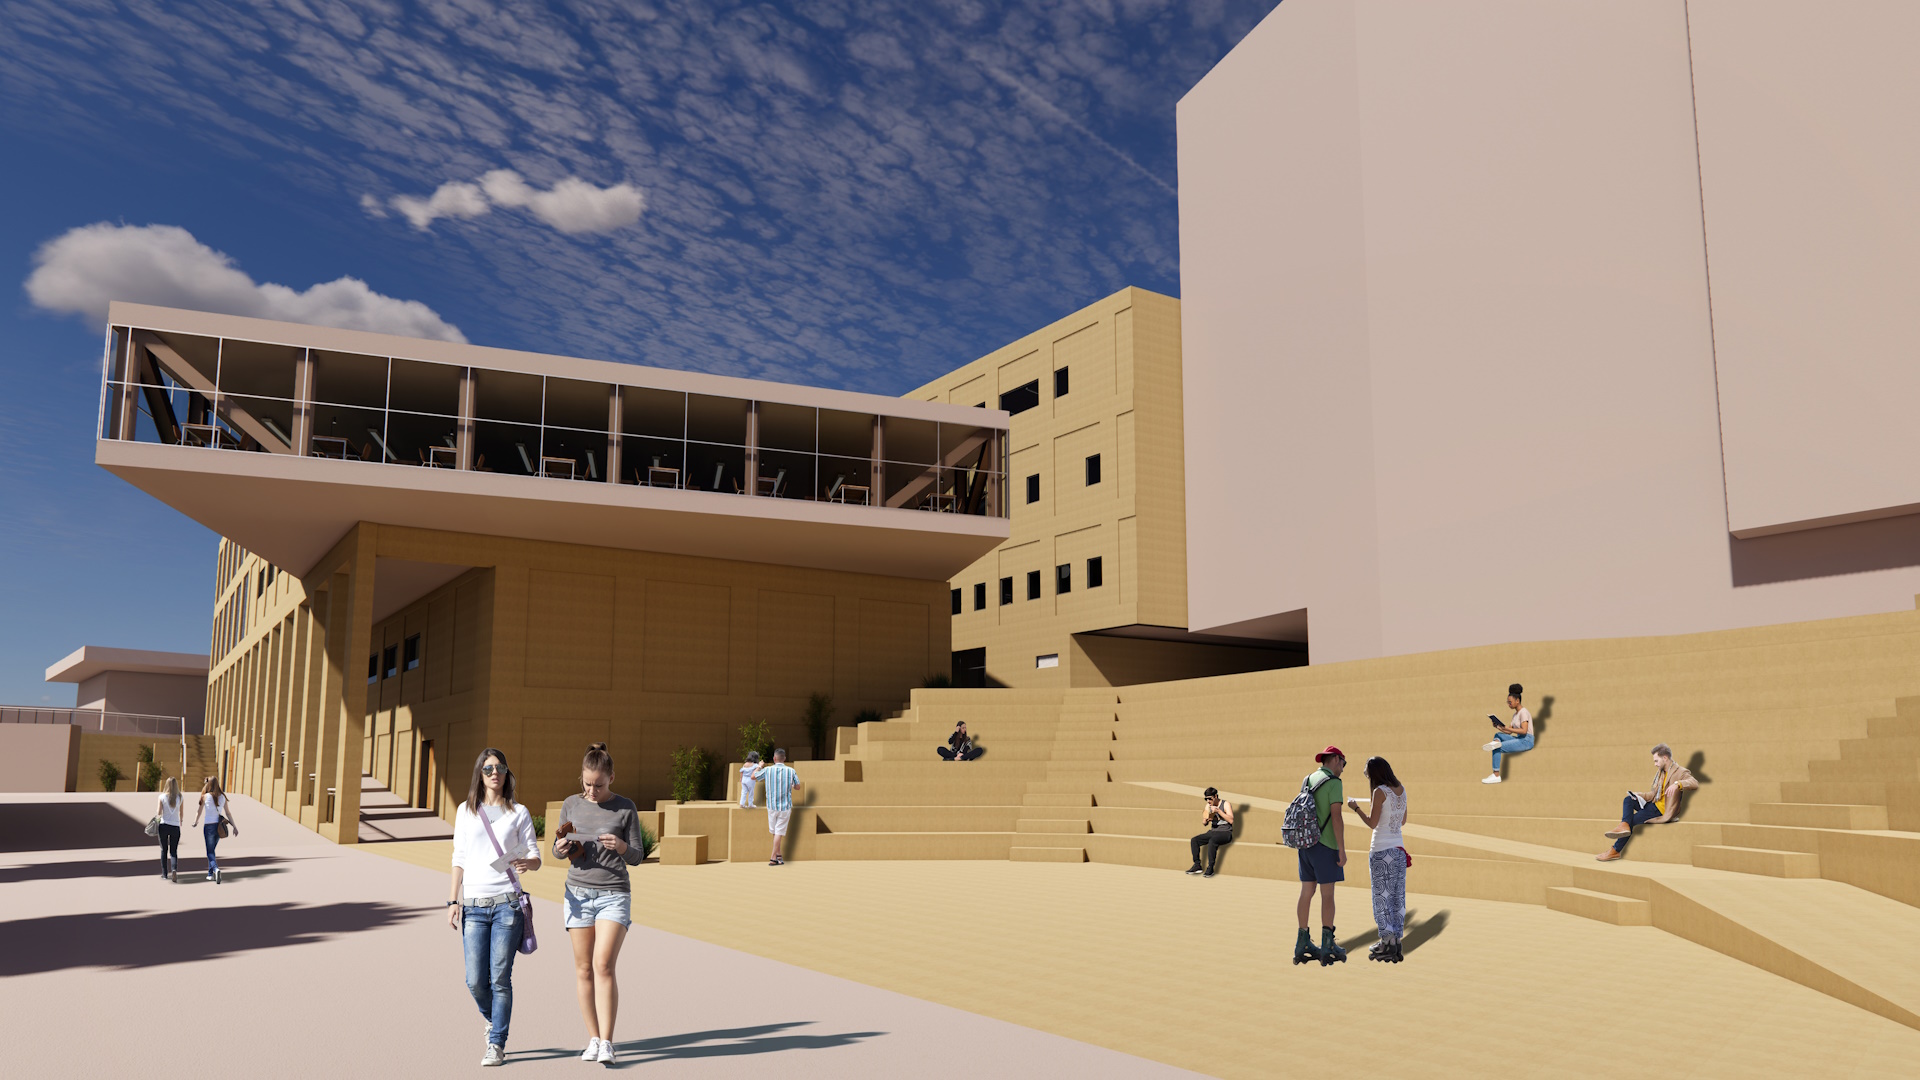 A rendered image of A sandstone amphitheatre with the building in the background.